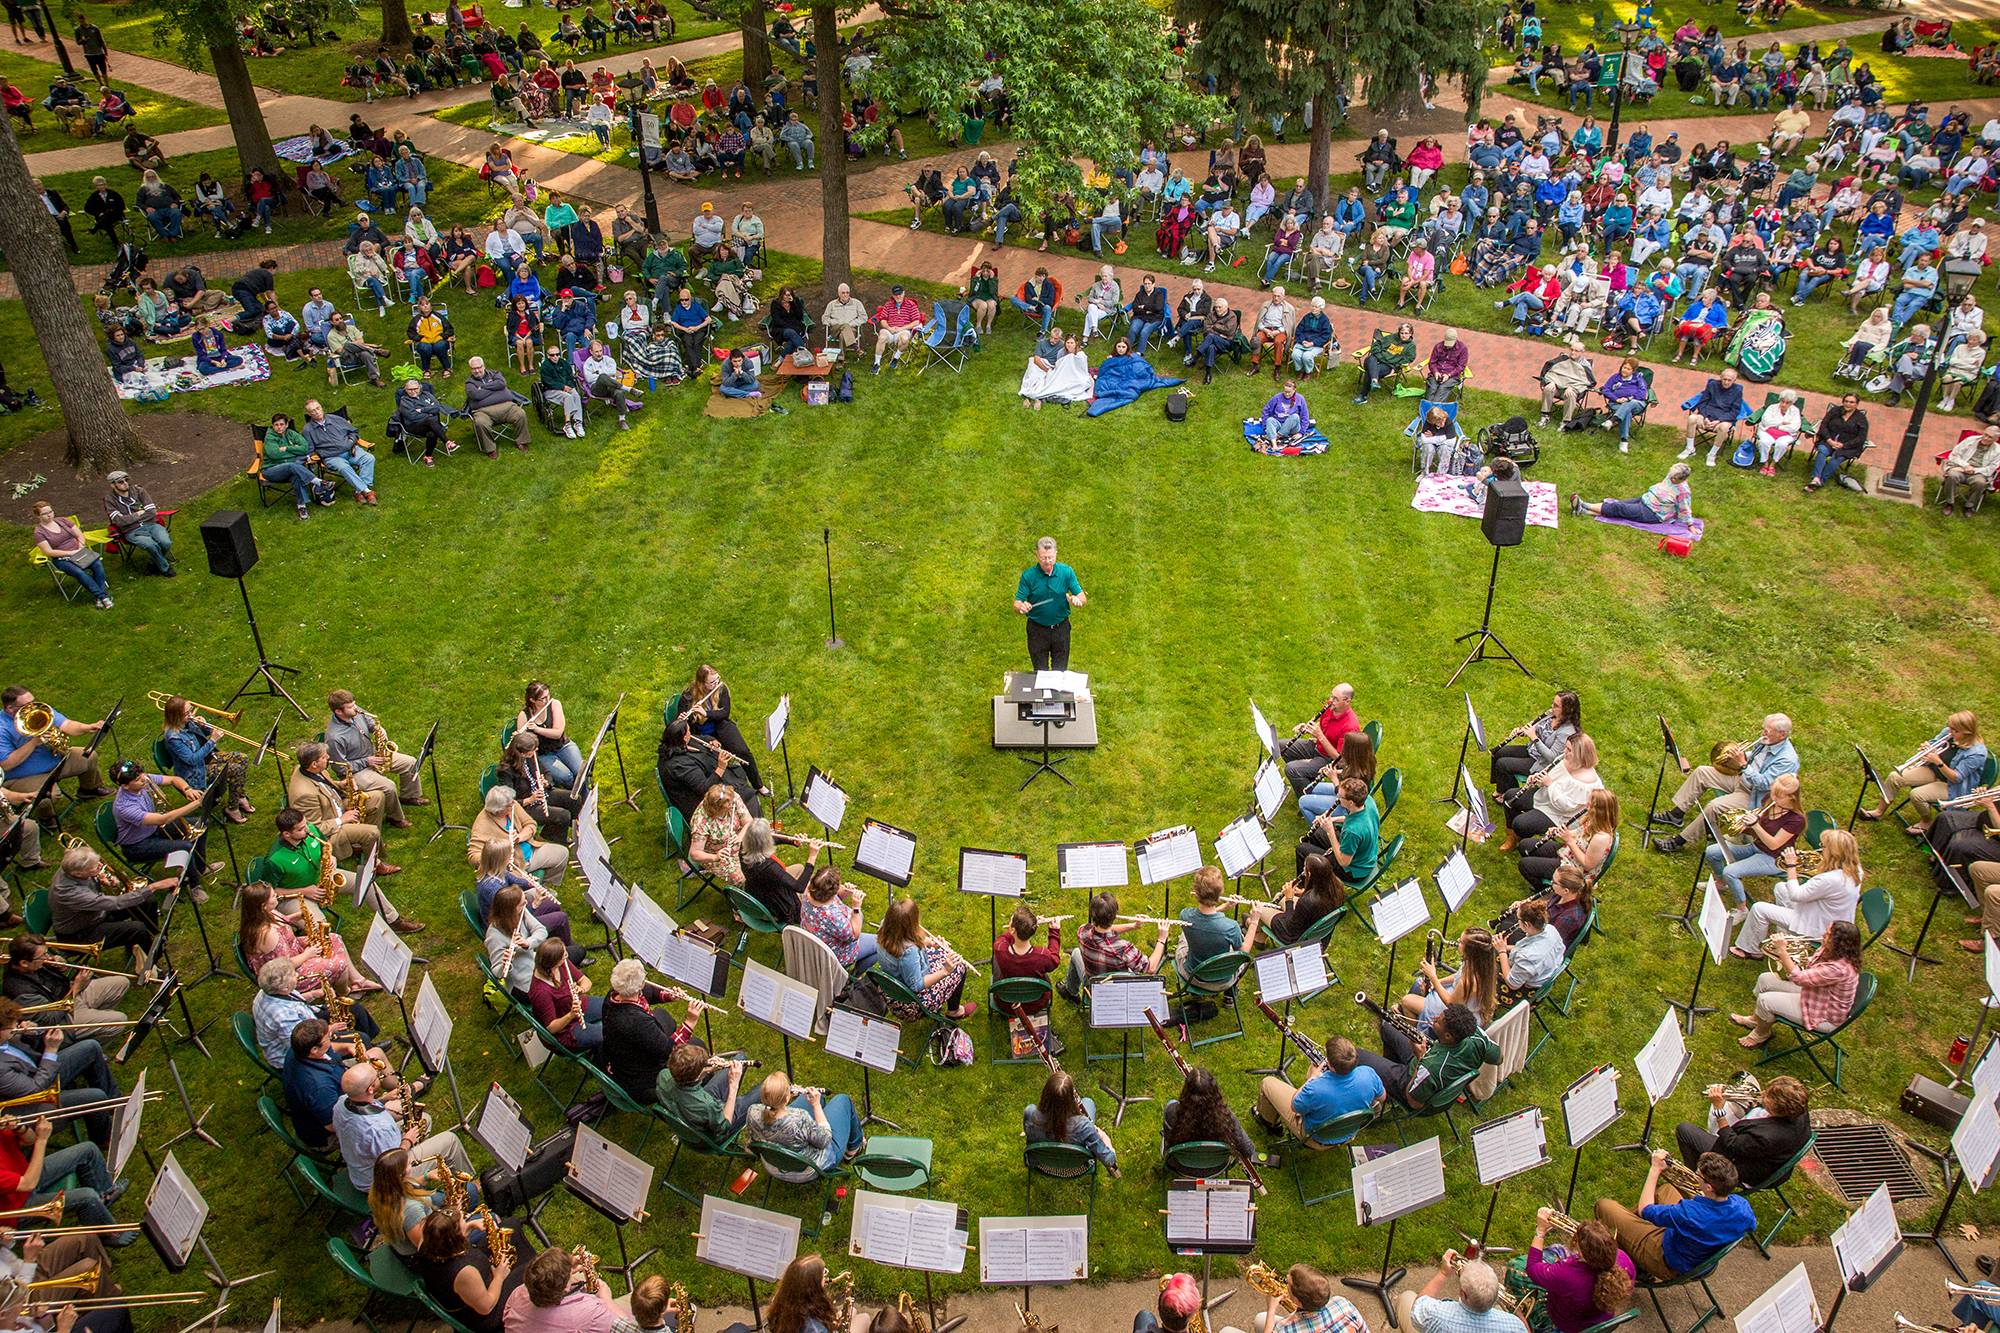 Community band members perform free weekly concerts on College Green during the summertime.